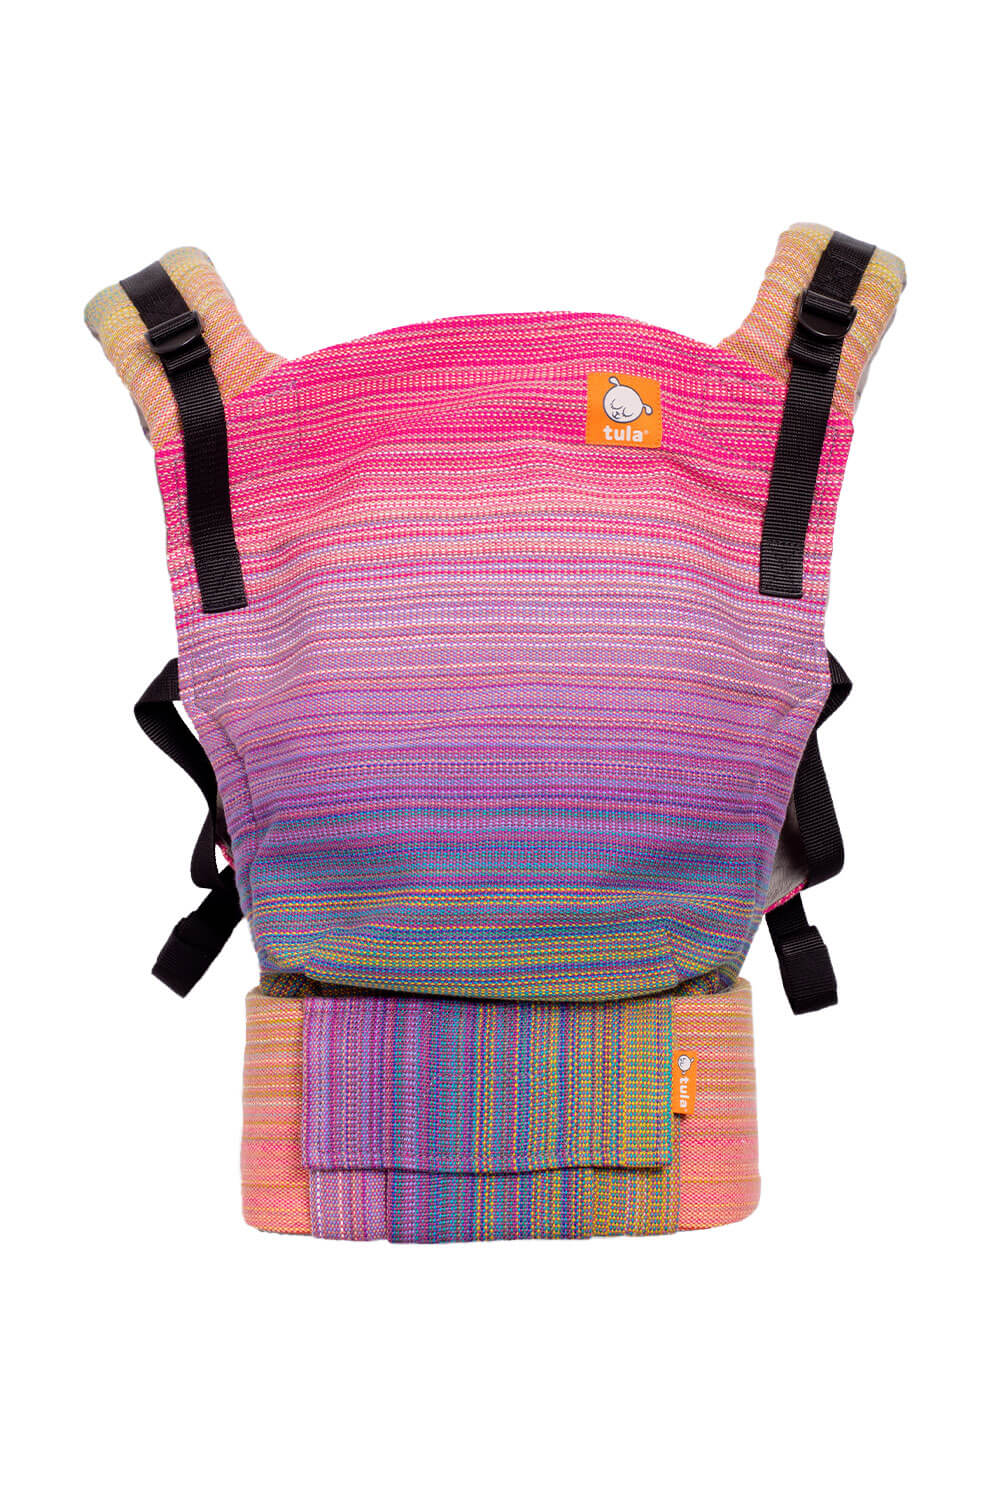 Mooncake - Signature Handwoven Free-to-Grow Baby Carrier